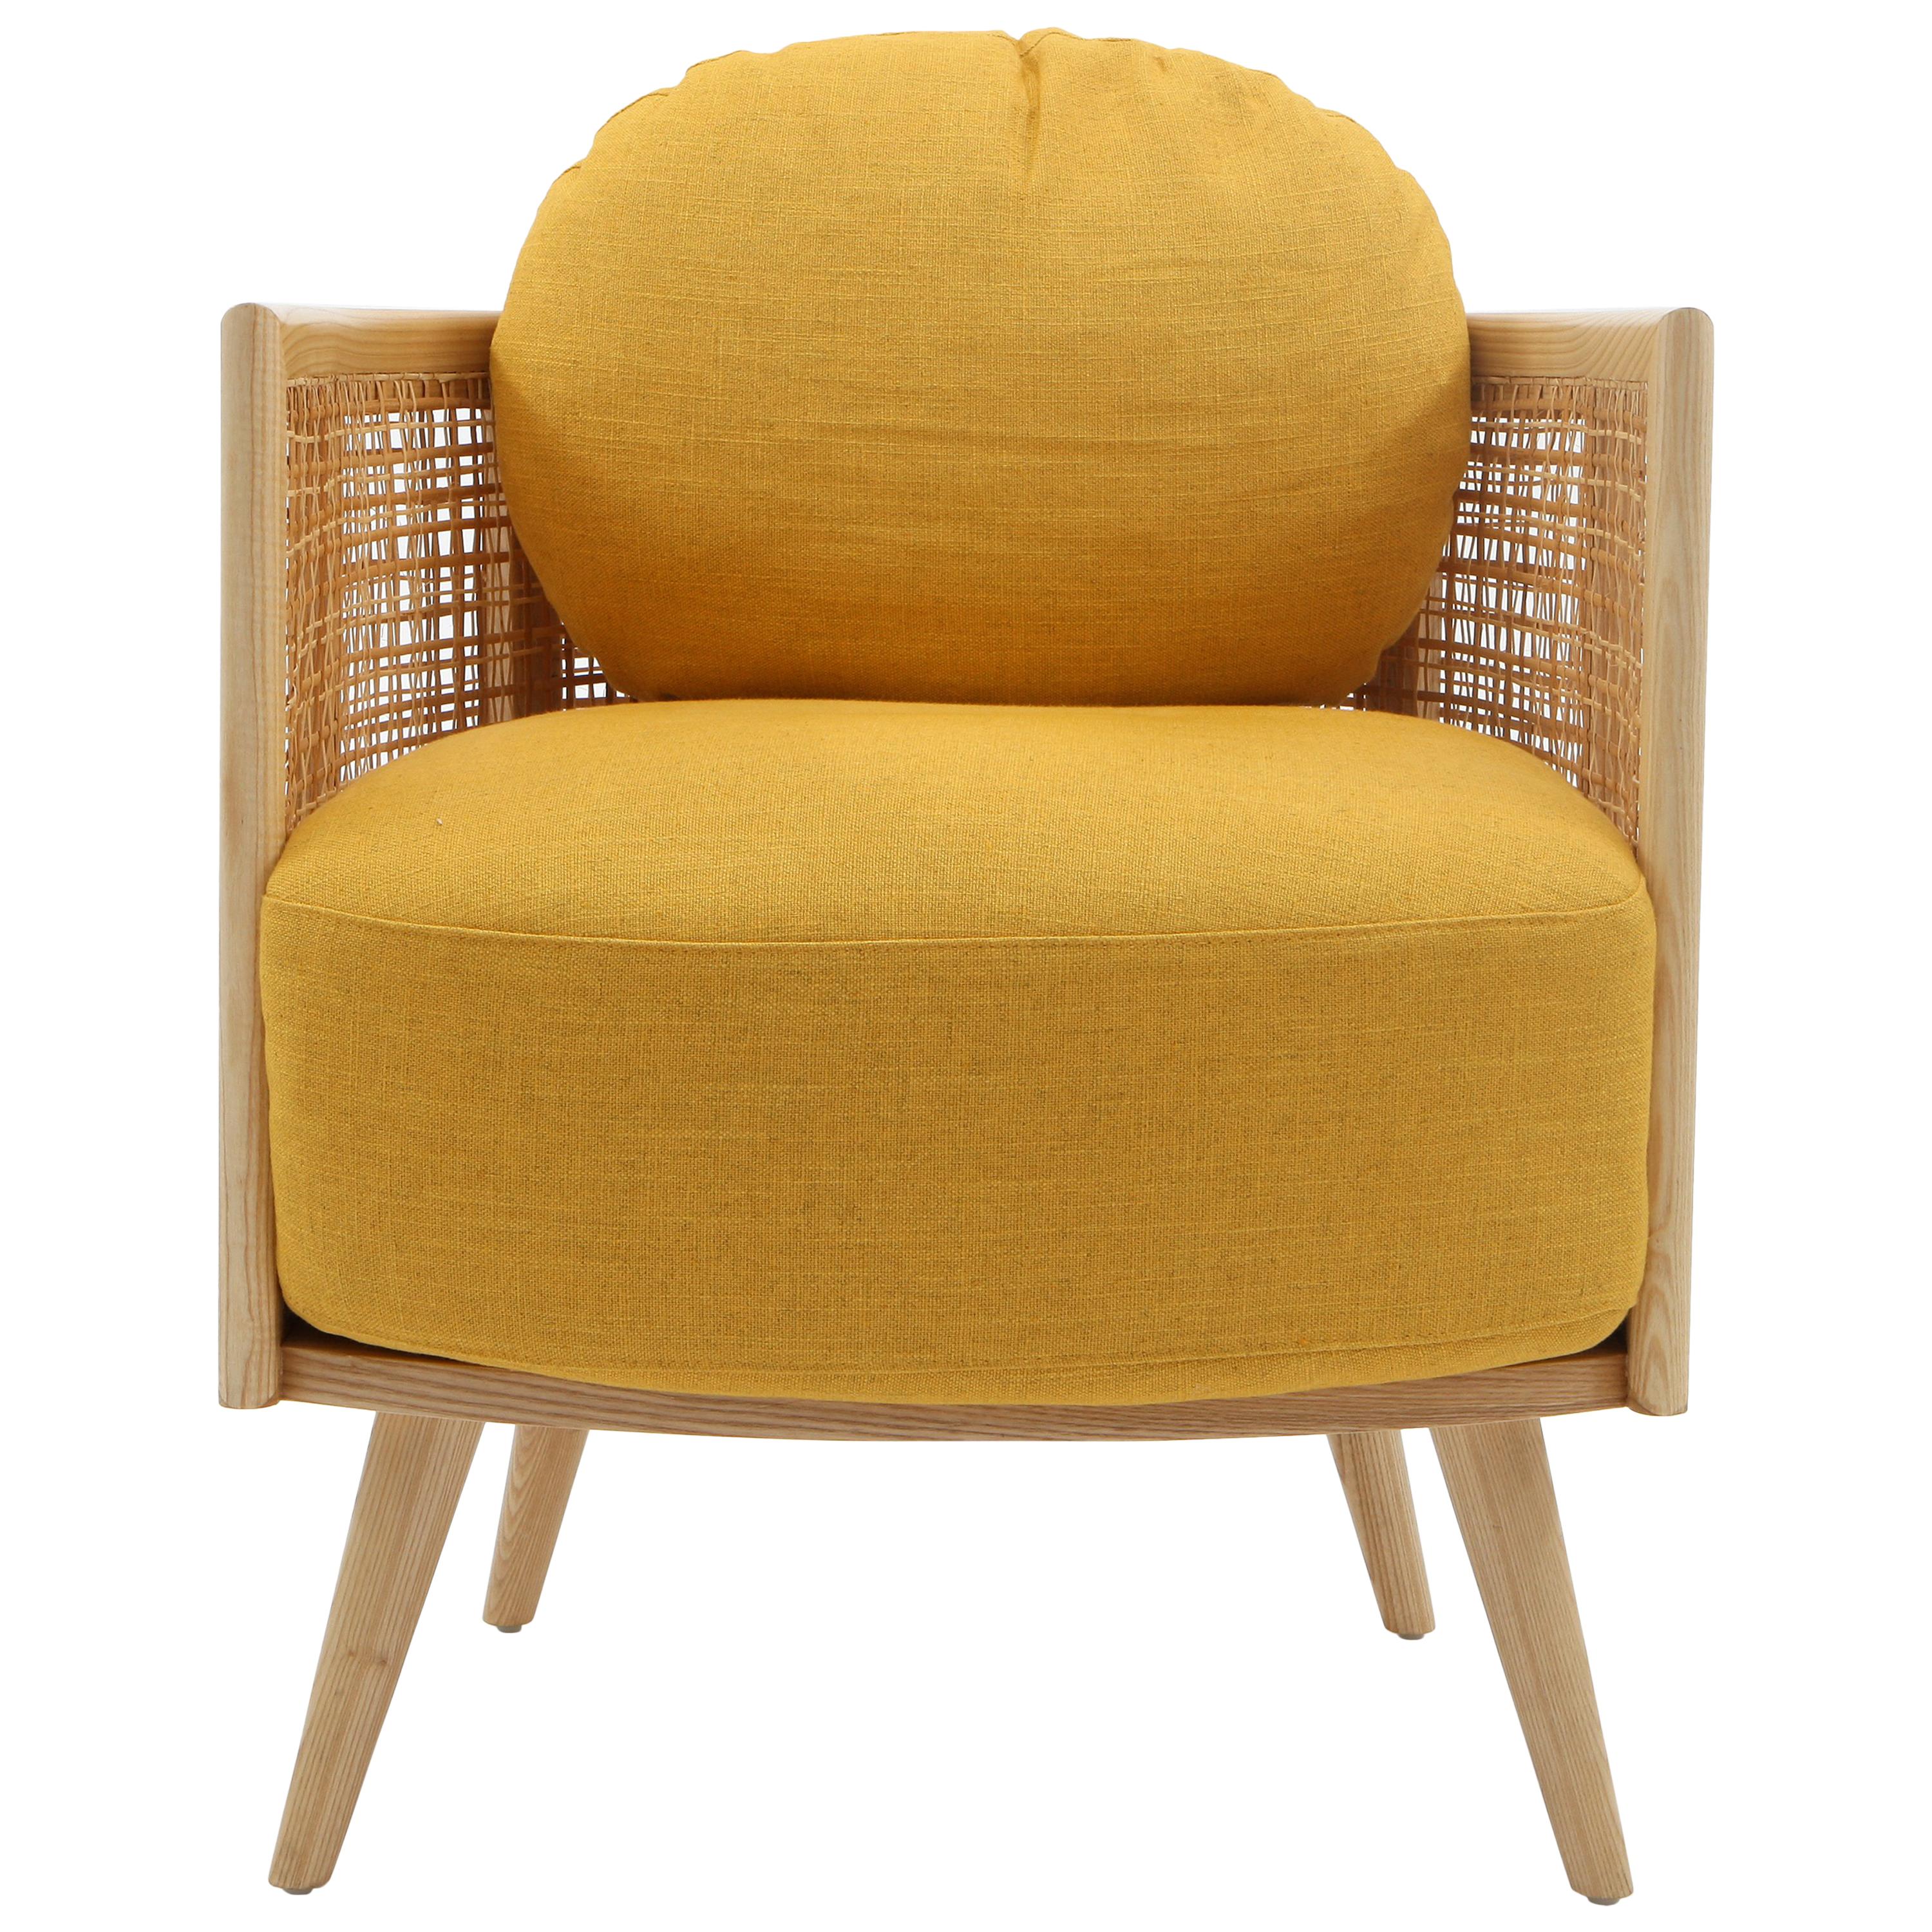 Summerland Armchair in solid ash wood and straw weaving pattern For Sale